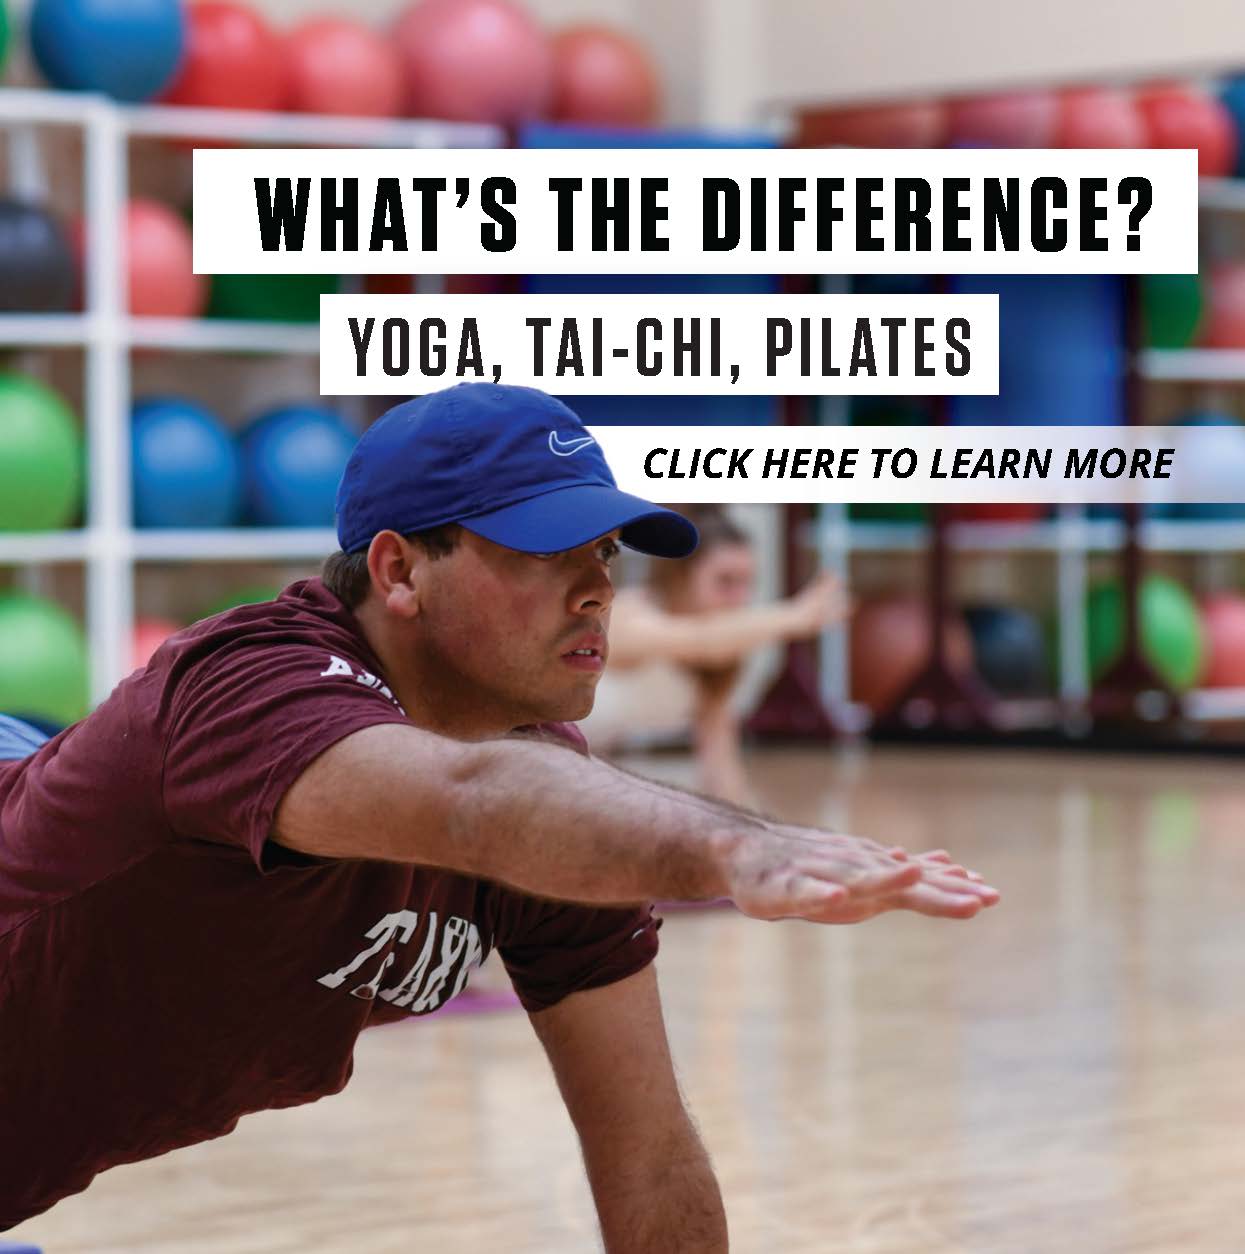 The Fitness & Wellness program under the Department of Rec Sports hosts a variety of classes for patrons to attend. For the unacquainted, many of these classes may seem similar or be completely new to mind. As such, a question you may be thinking as you scroll through the Rec Sports app is simply, “what’s the difference”?